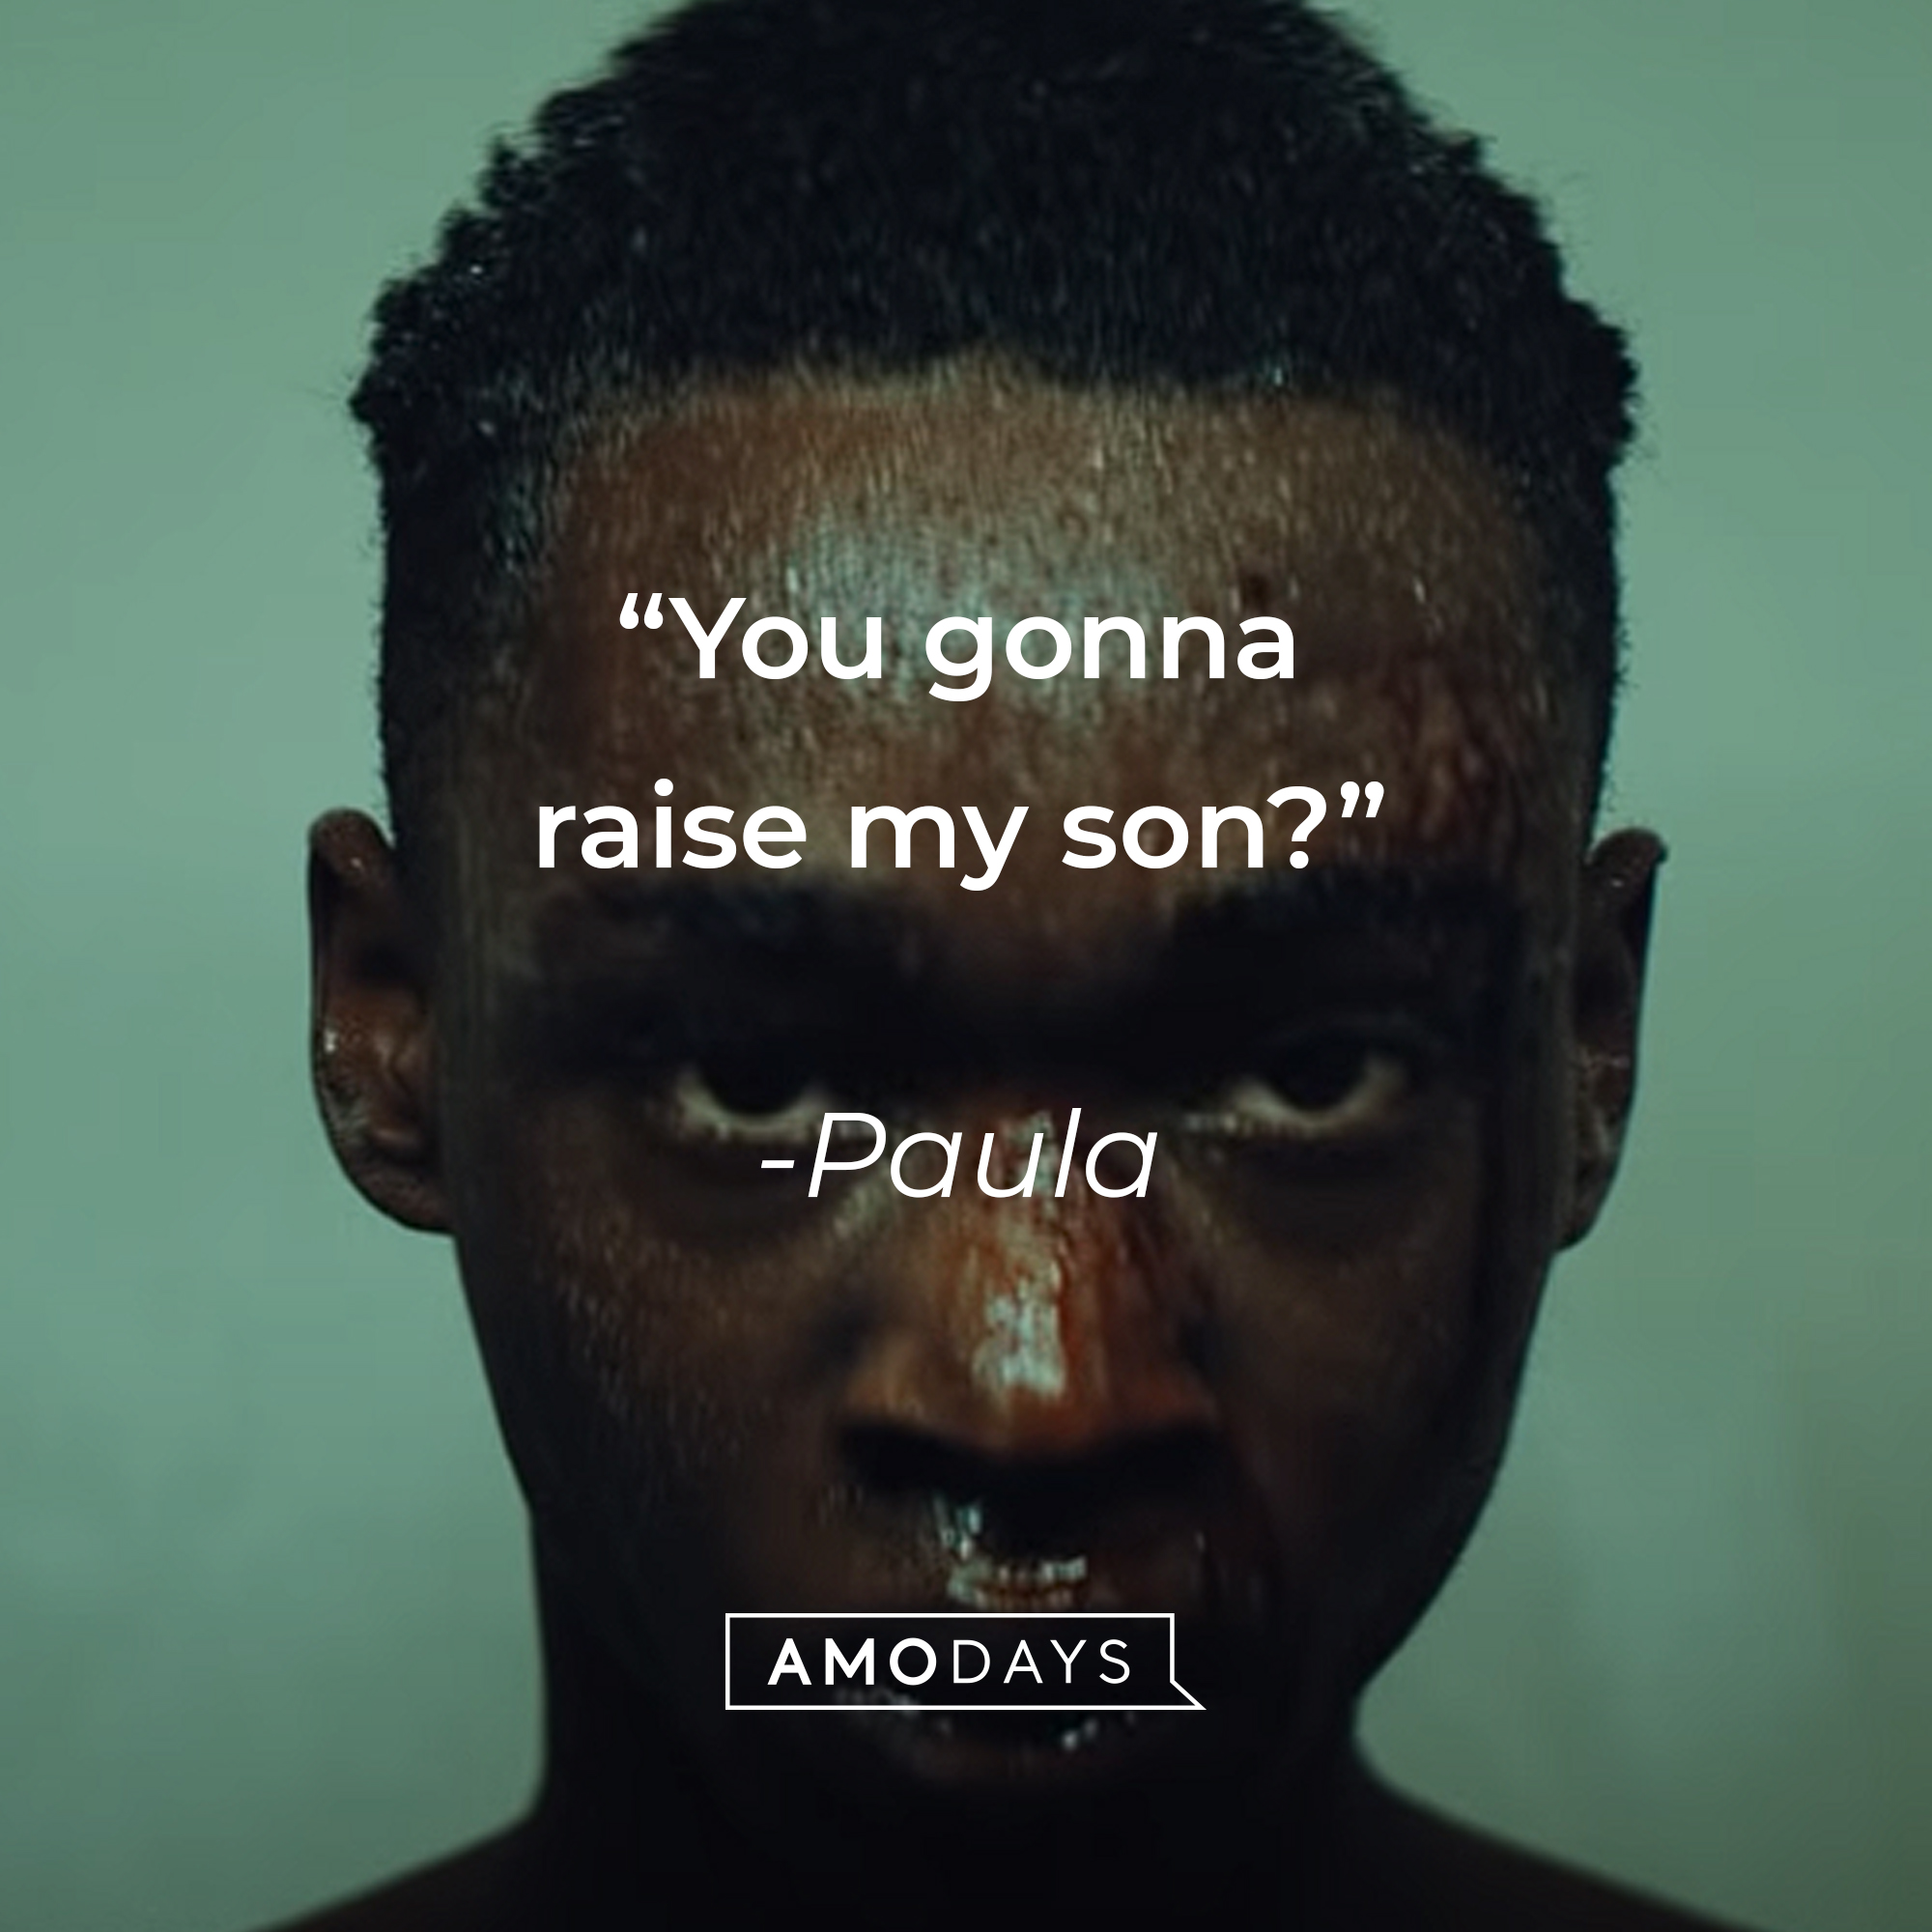 An image of Chiron with Paula’s quote: “You gonna raise my son?” | Source: youtube.com/A24